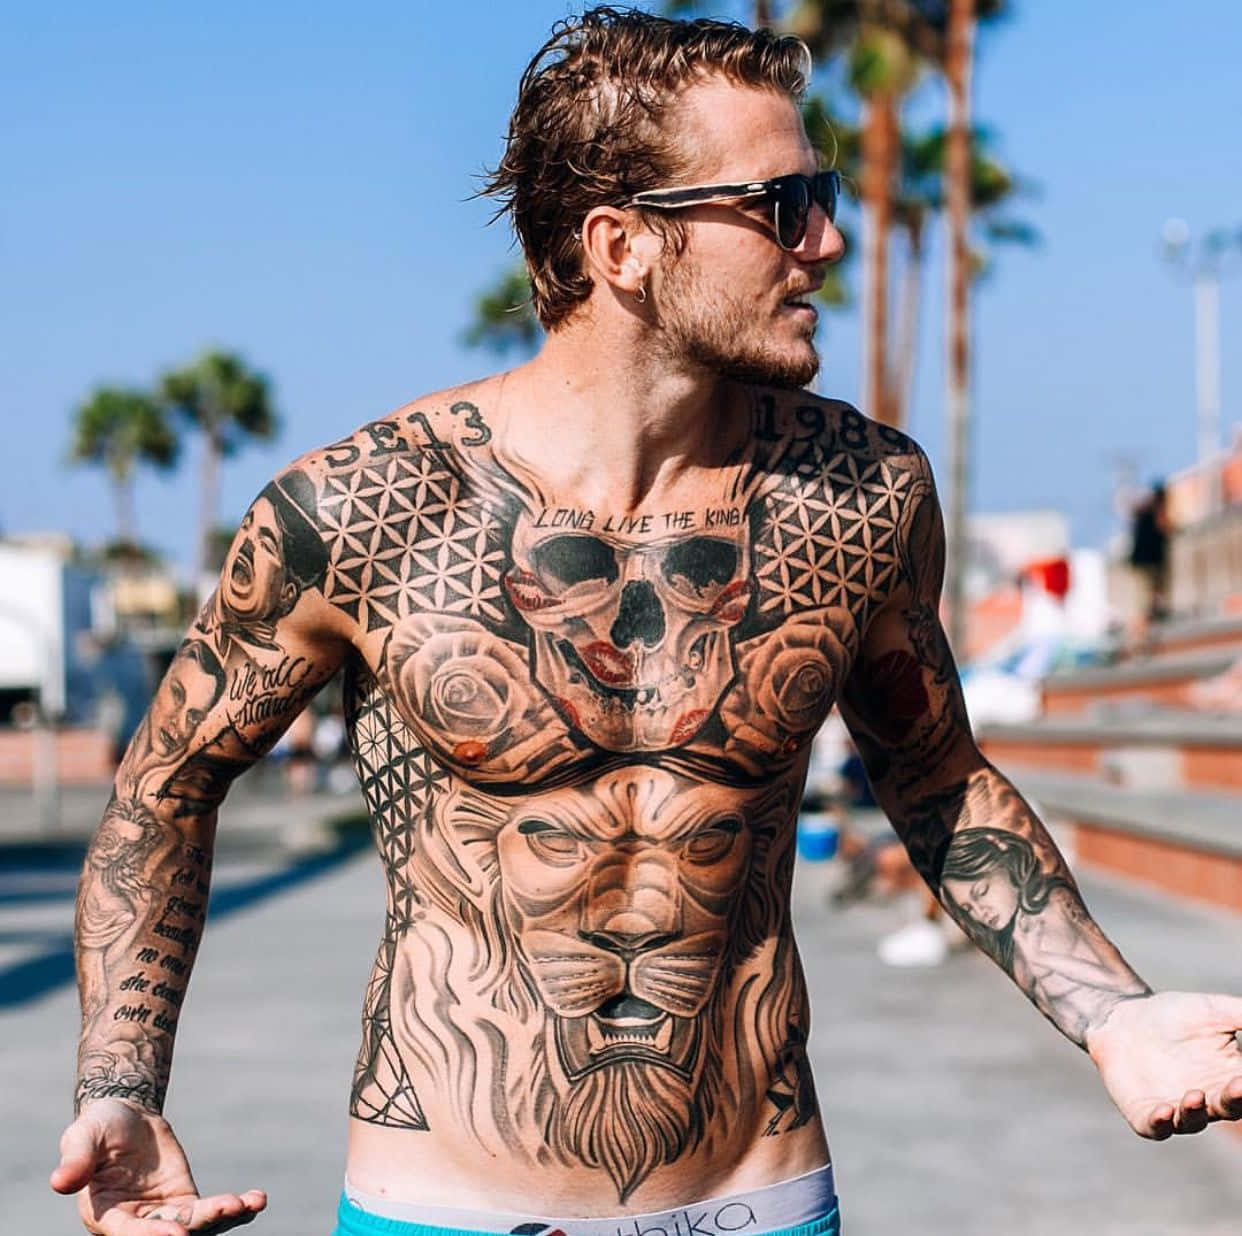 A Man With Tattoos On His Chest Walking Down The Street